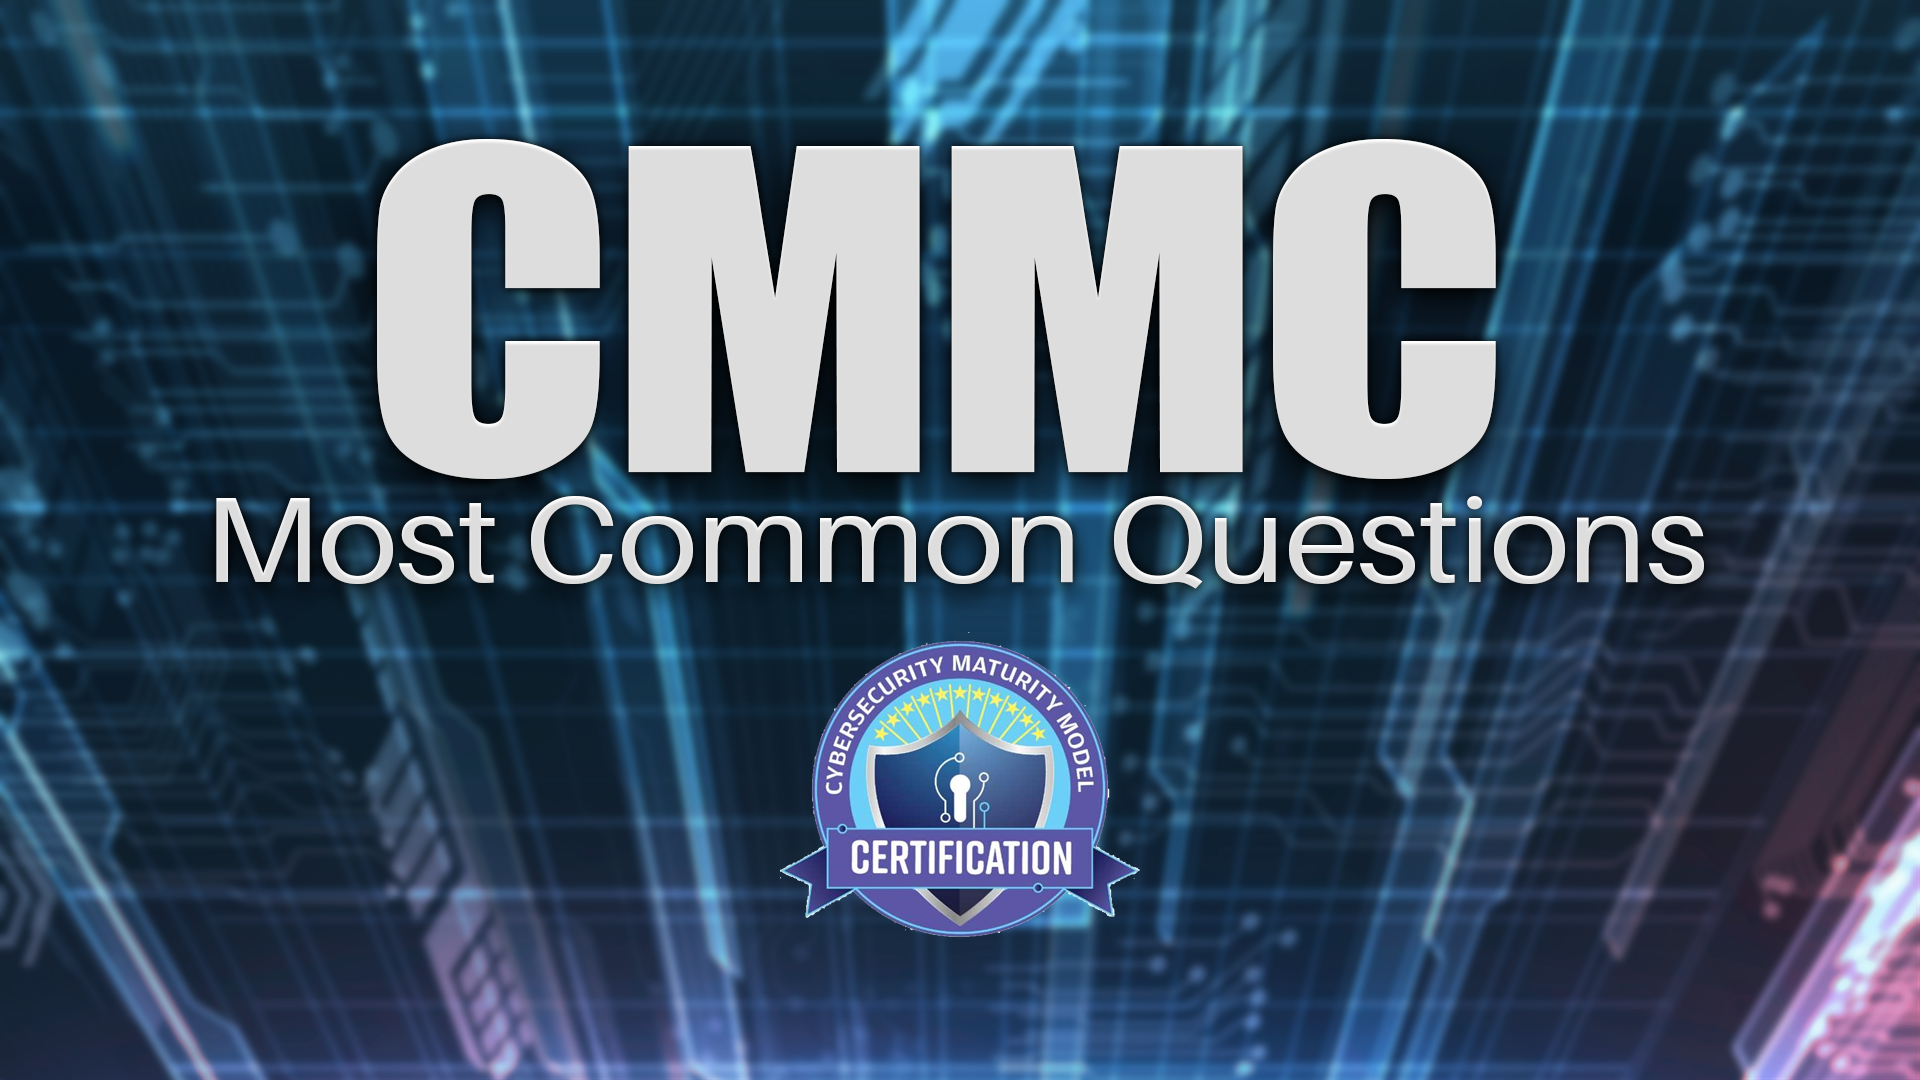 CMMC Most Common Questions